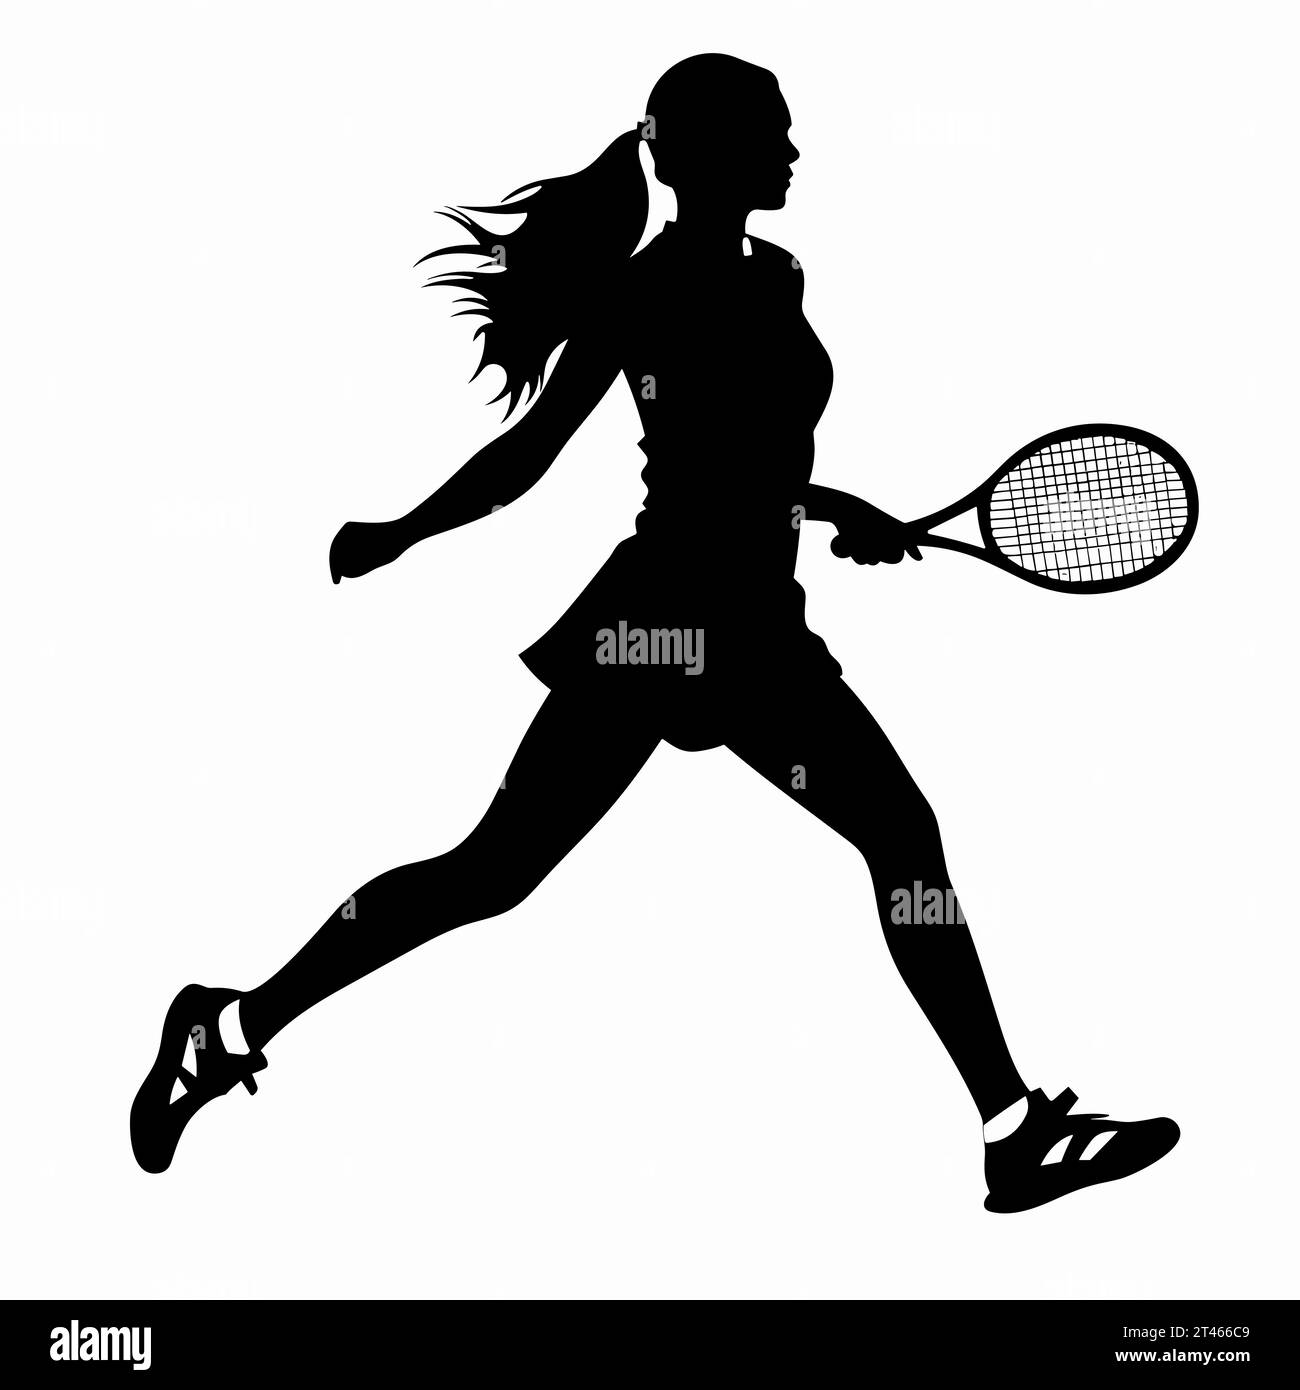 Female tennis player silhouette. Female tennis player black icon on white background Stock Vector